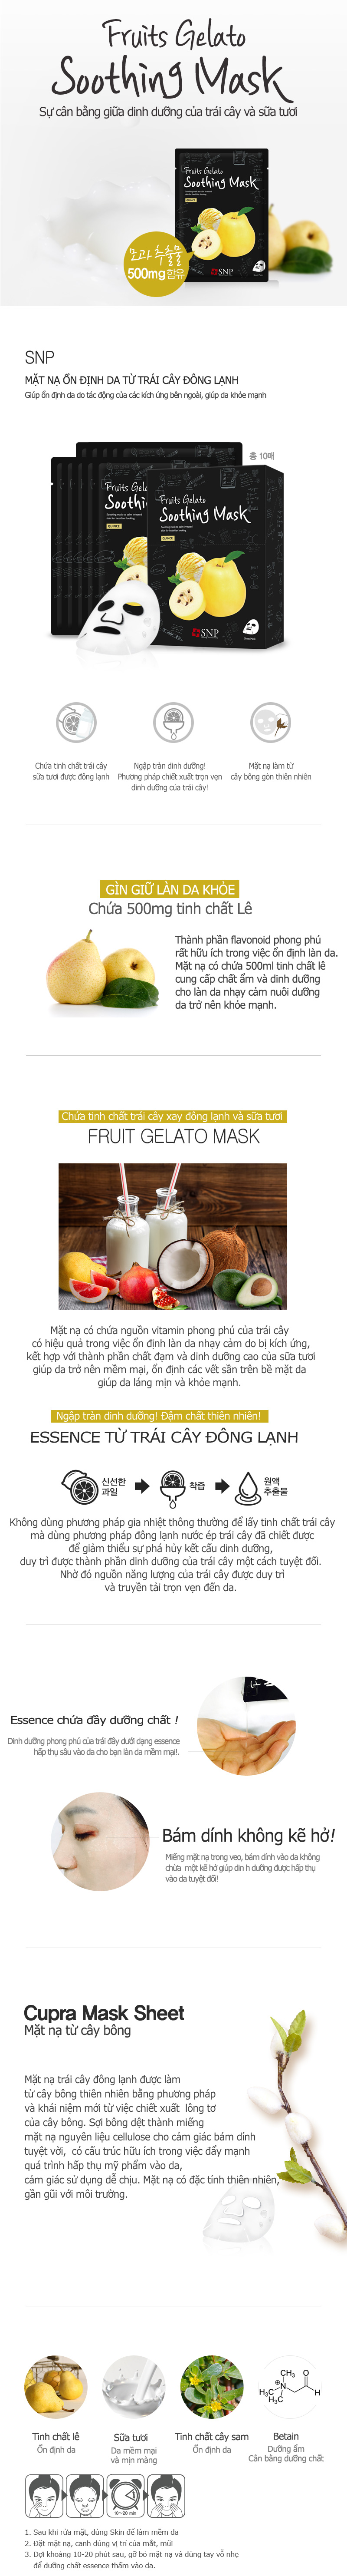 SNP FRUITS GELATO SOOTHING MASK